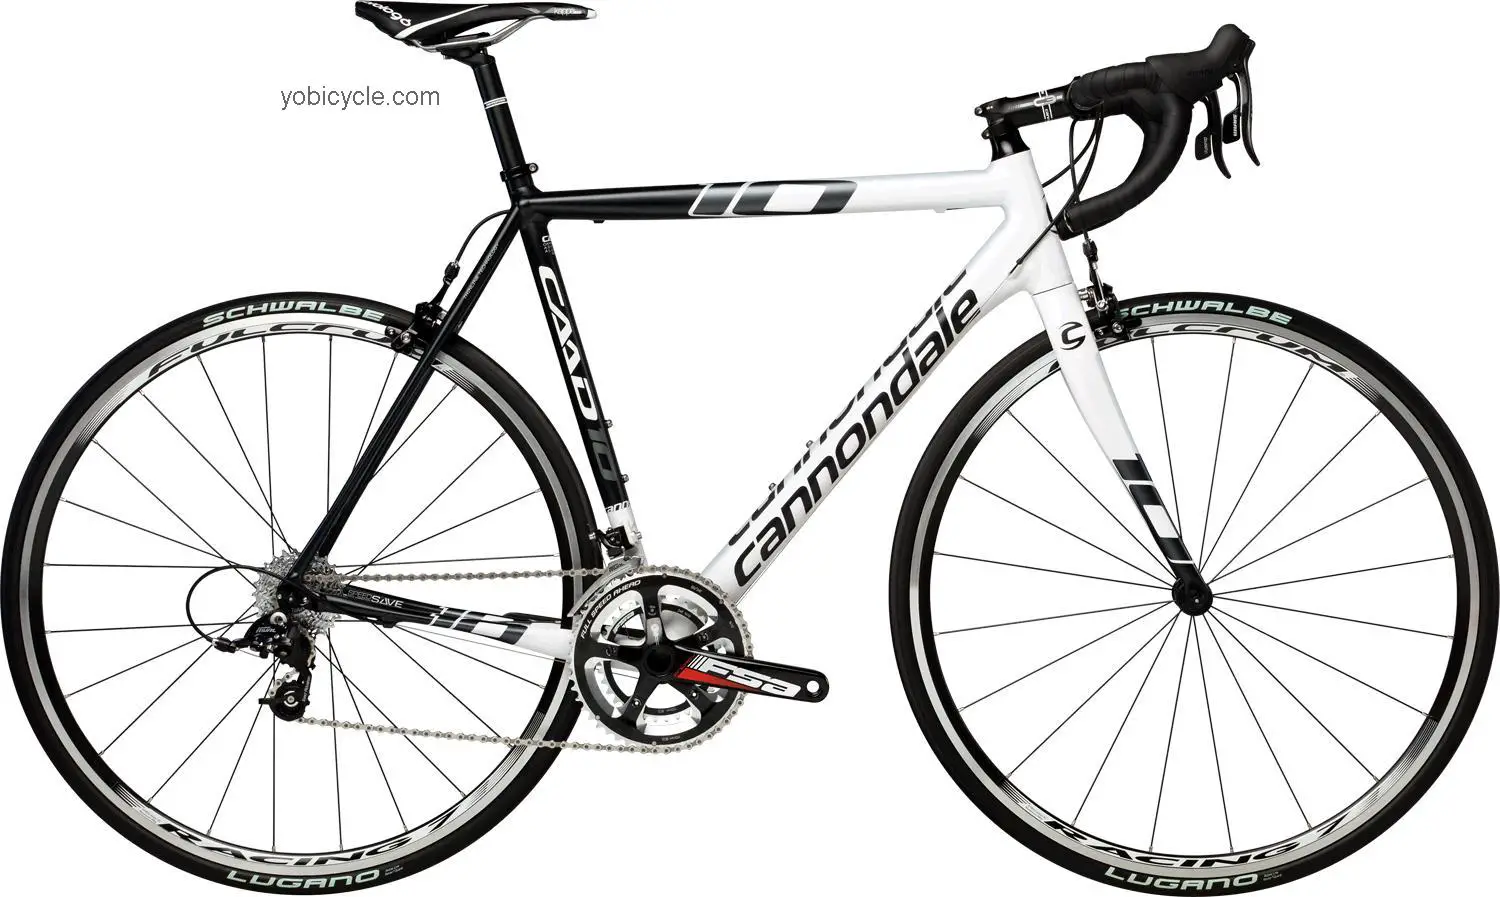 Cannondale CAAD10 4 Rival 2013 comparison online with competitors